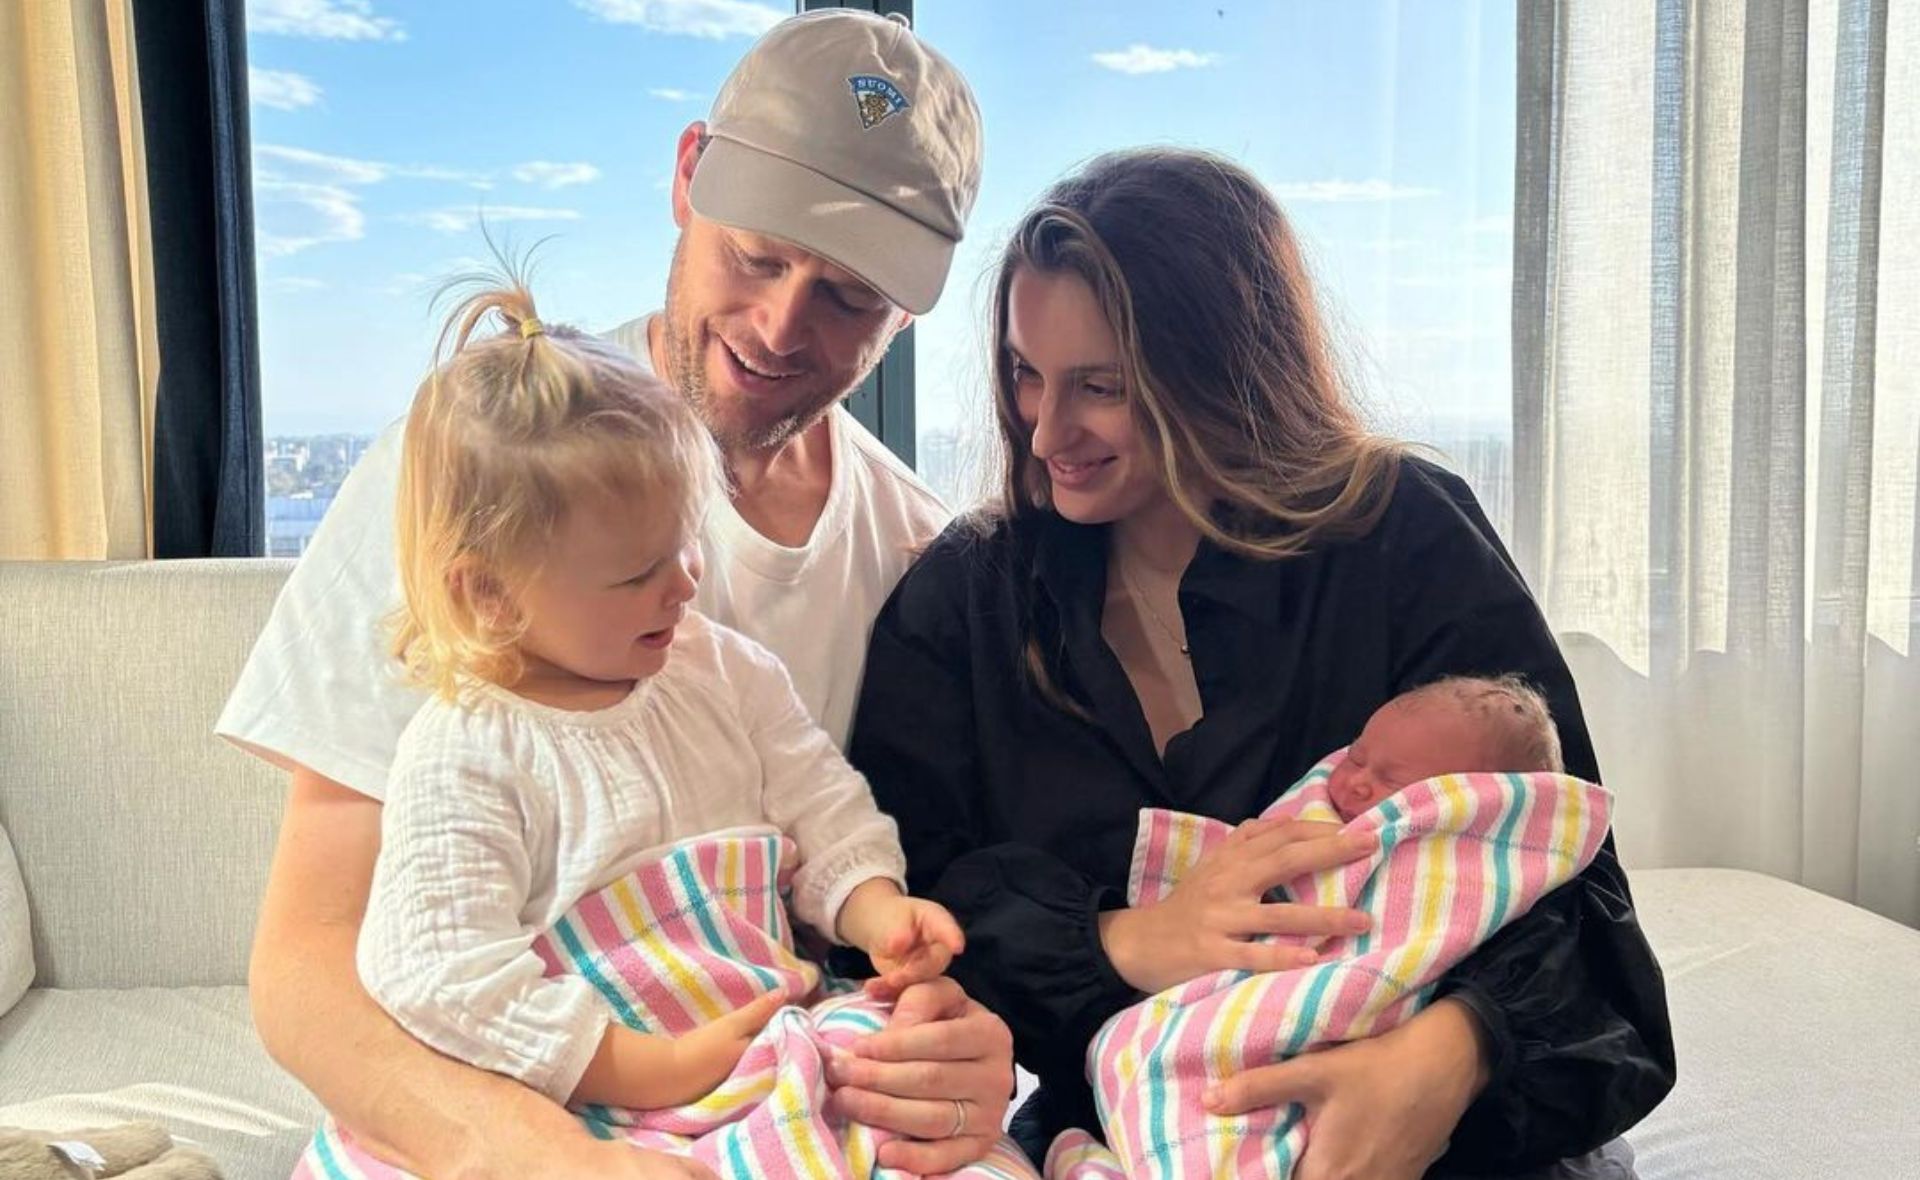 Channel Nine presenter Tom Steinfort and wife Claudia Jukic welcome another bundle of joy